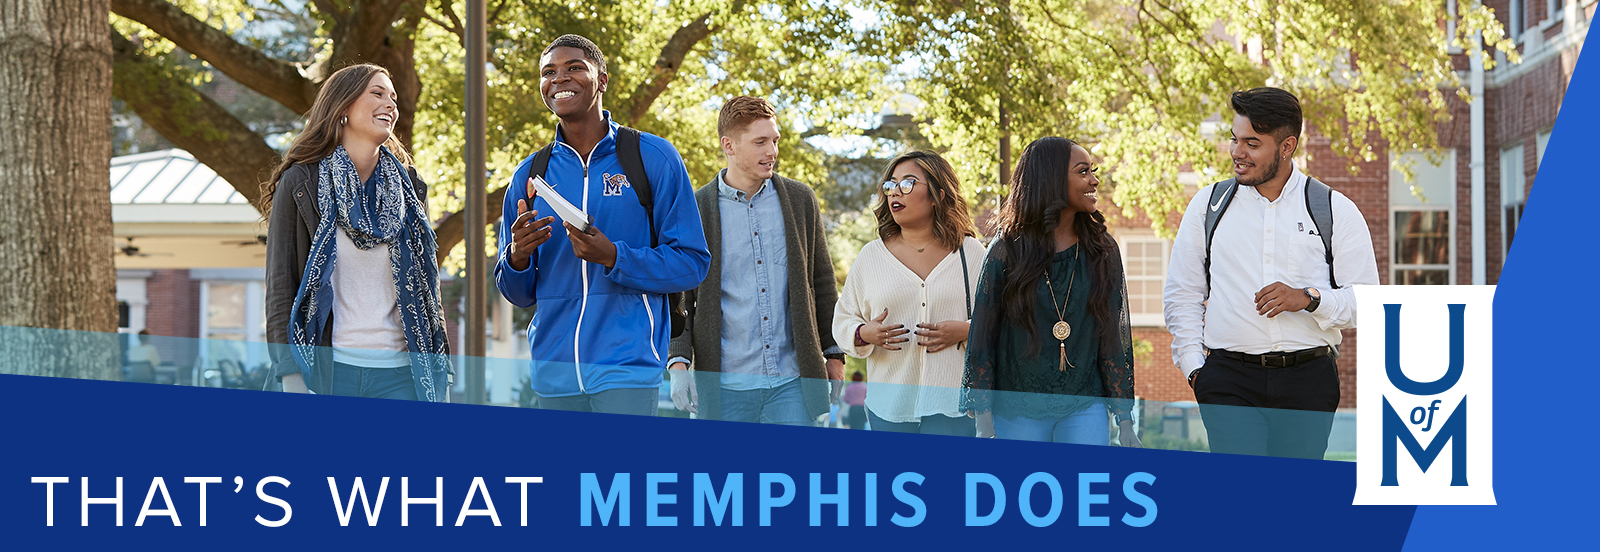 "That's what Memphis does." - header image with students walking on campus